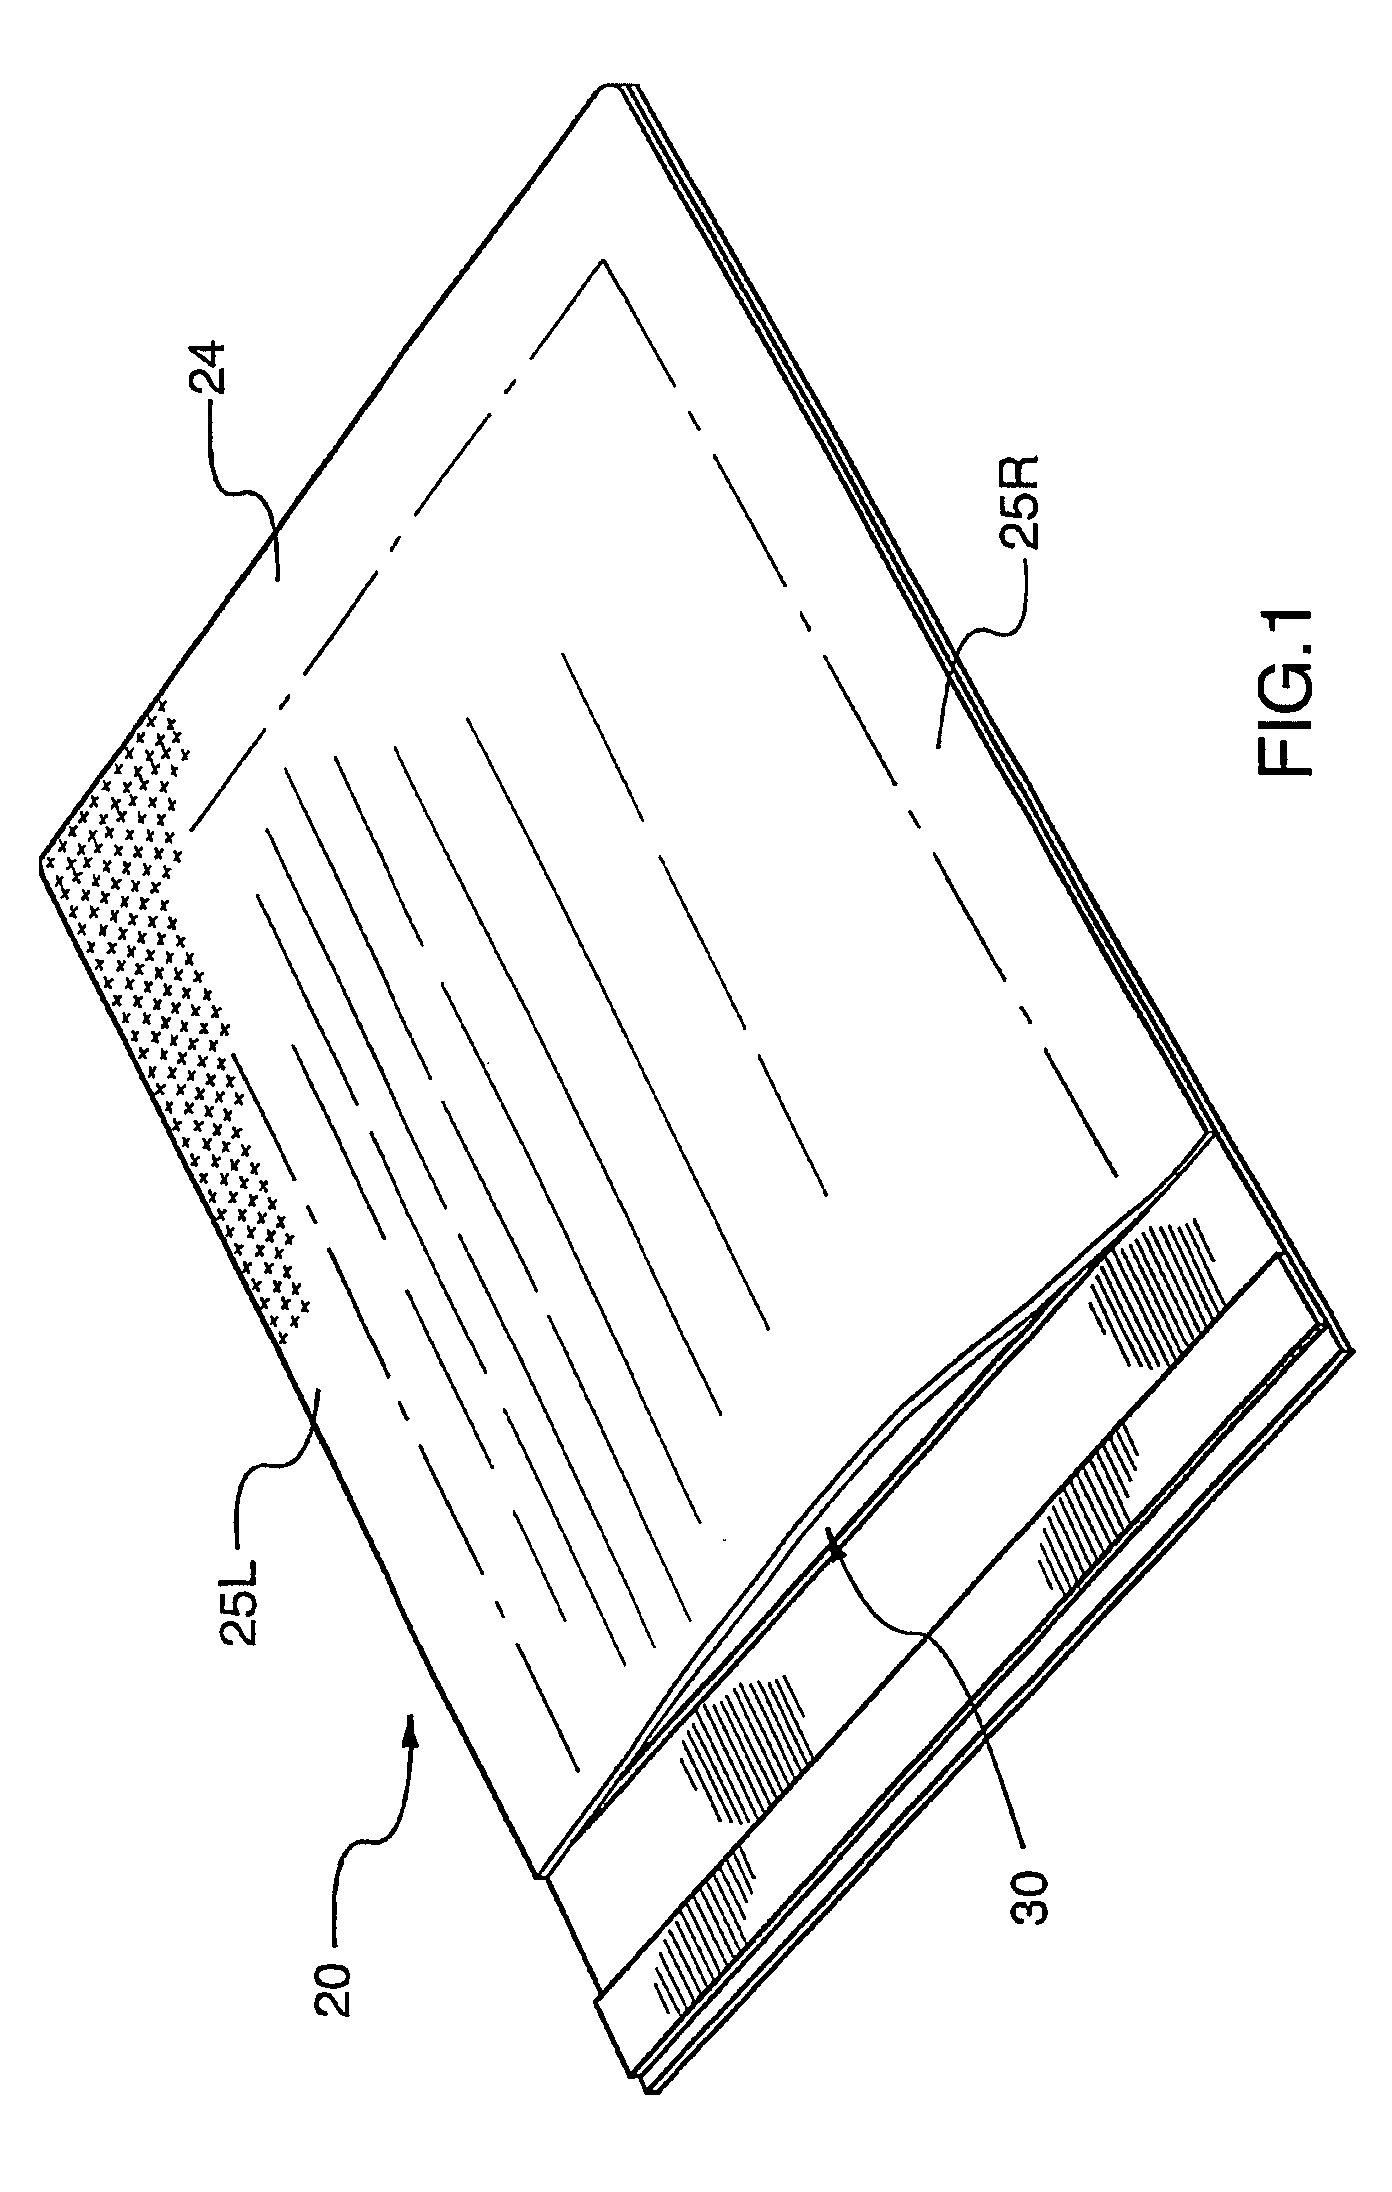 Procedure of attaching sheets and padded envelope